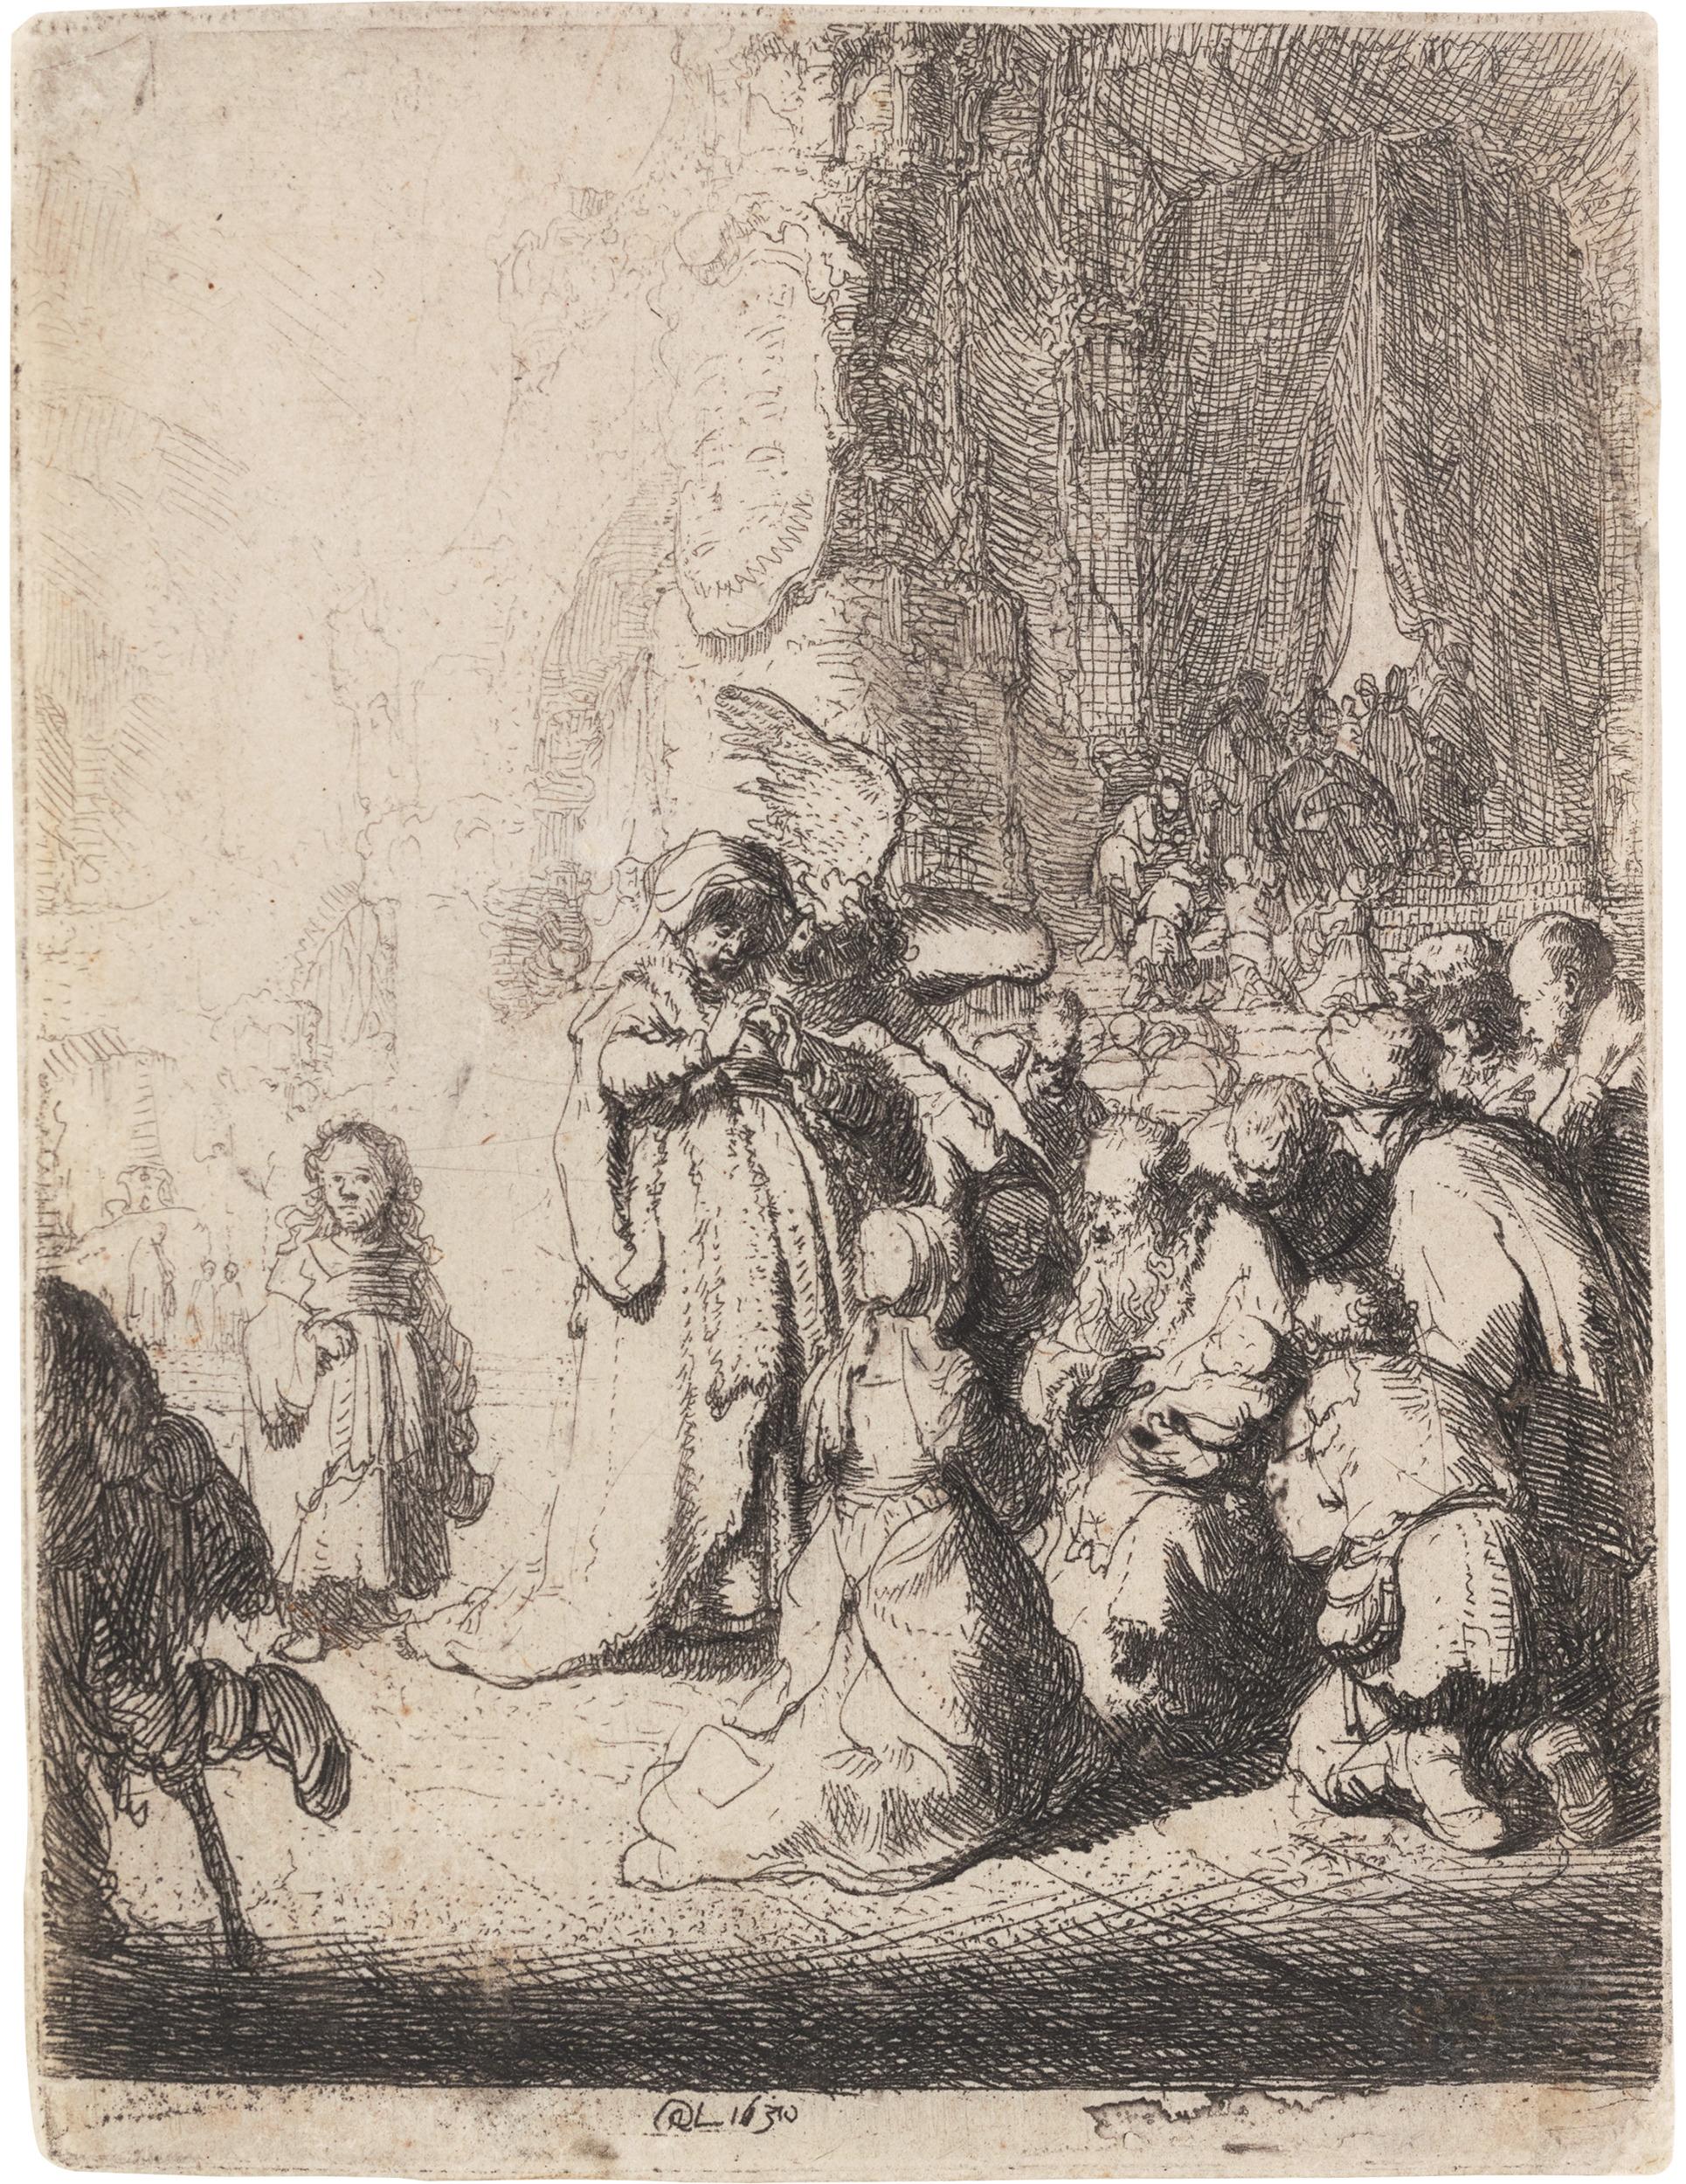 The Presentation In The Temple With The Angel By Rembrandt Van Rijn - Print by Rembrandt van Rijn